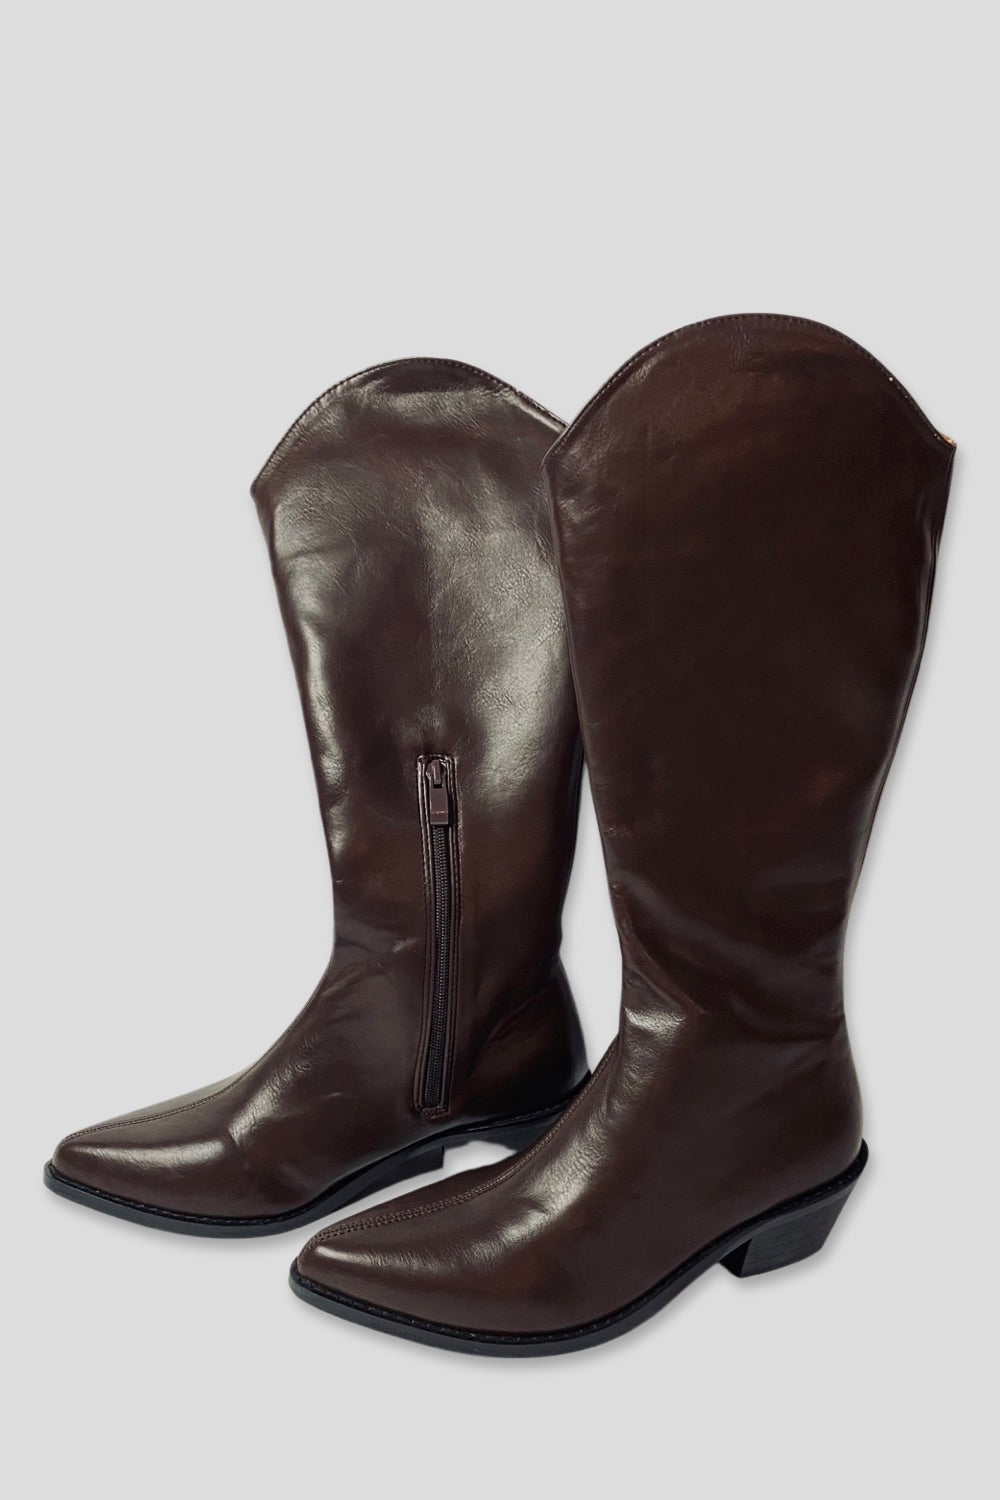 COURTNEY BROWN BOOTS